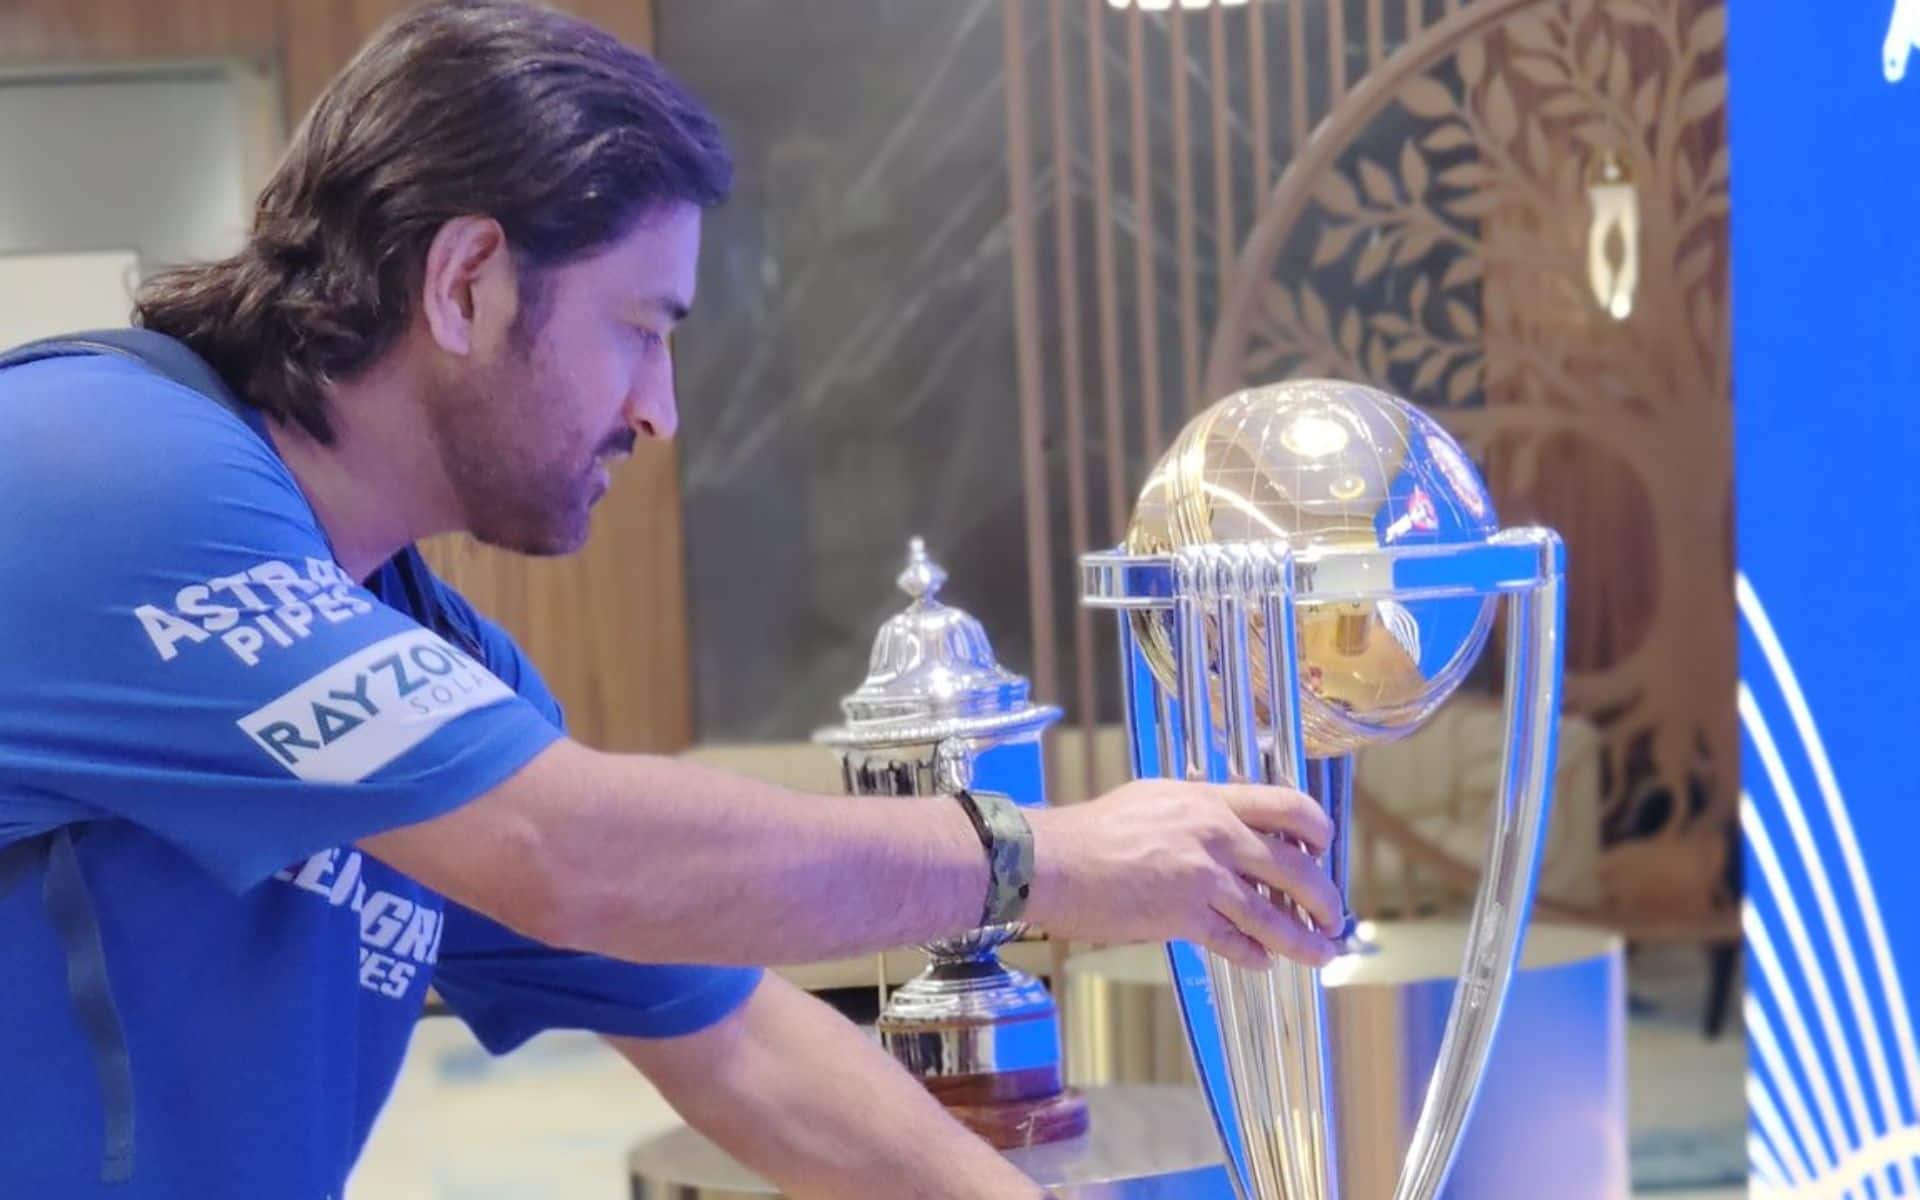 MS Dhoni Shares Nostalgic Moments With World Cup 2011 Trophy Before MI vs CSK (Check Pics)